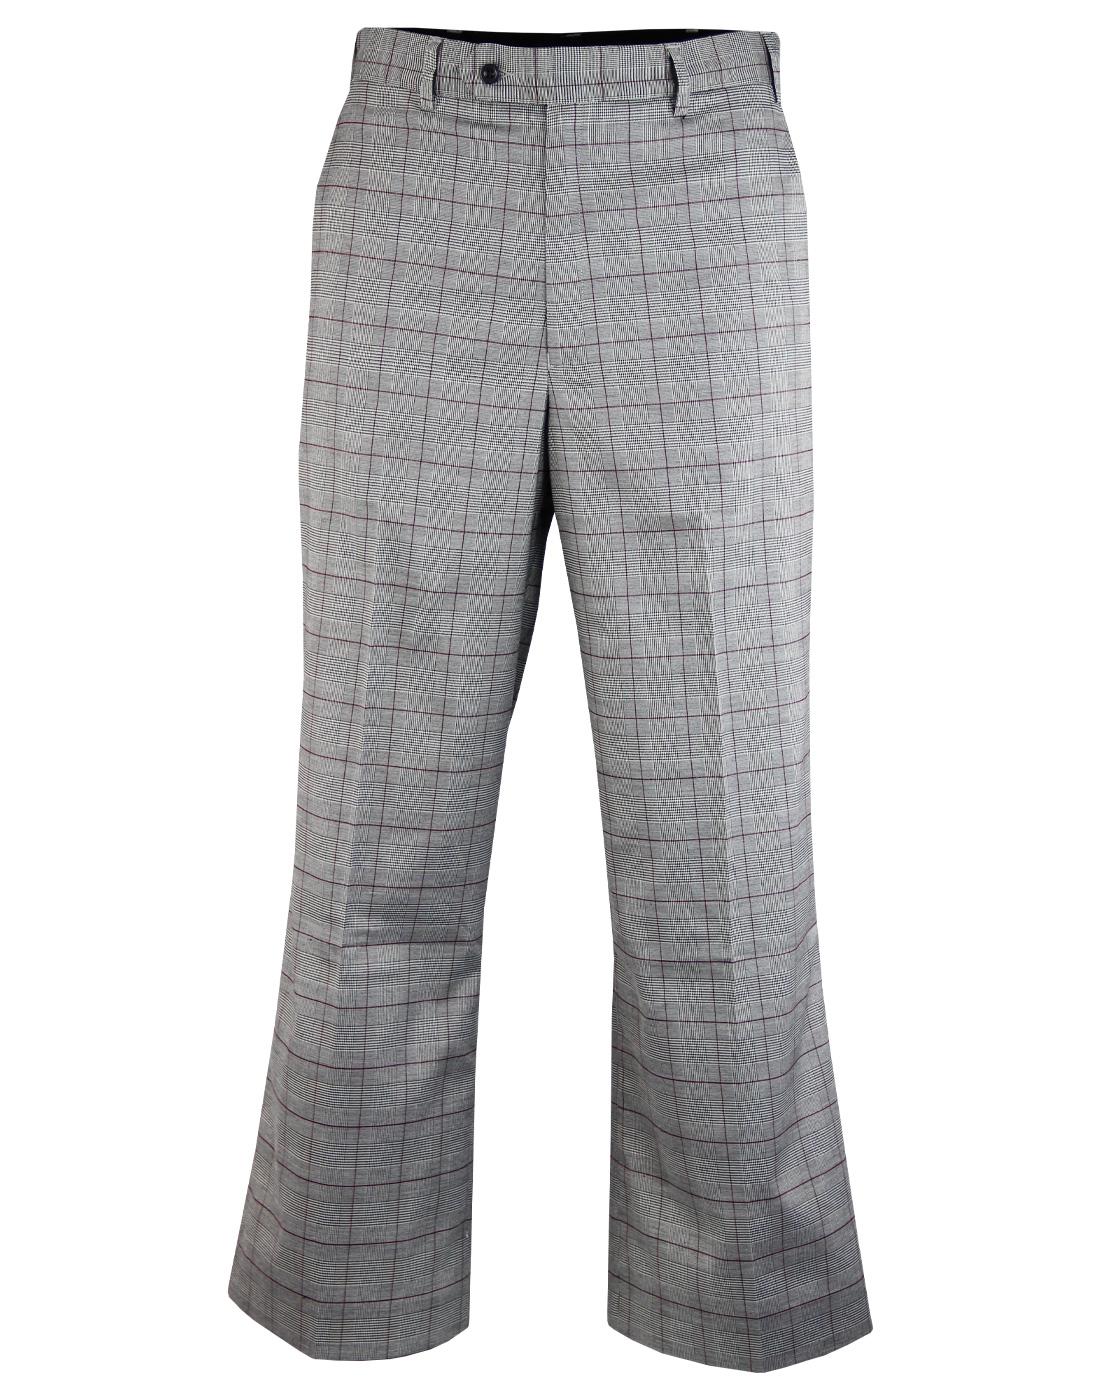 WIGAN CASINO Northern Soul 70s Mod POW Check Oxford Bags Trousers